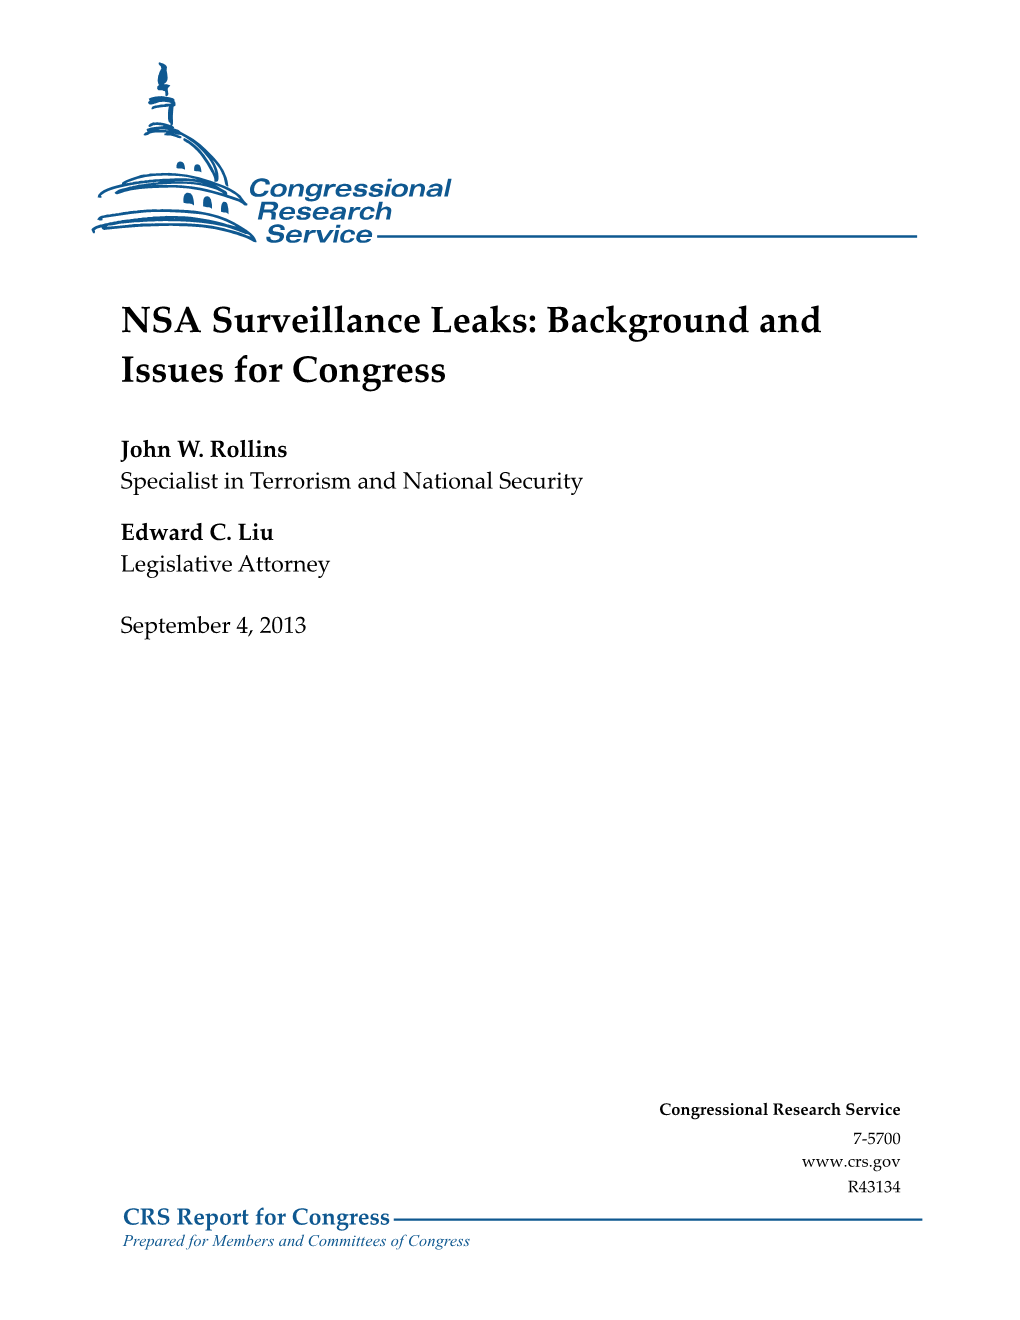 NSA Surveillance Leaks: Background and Issues for Congress